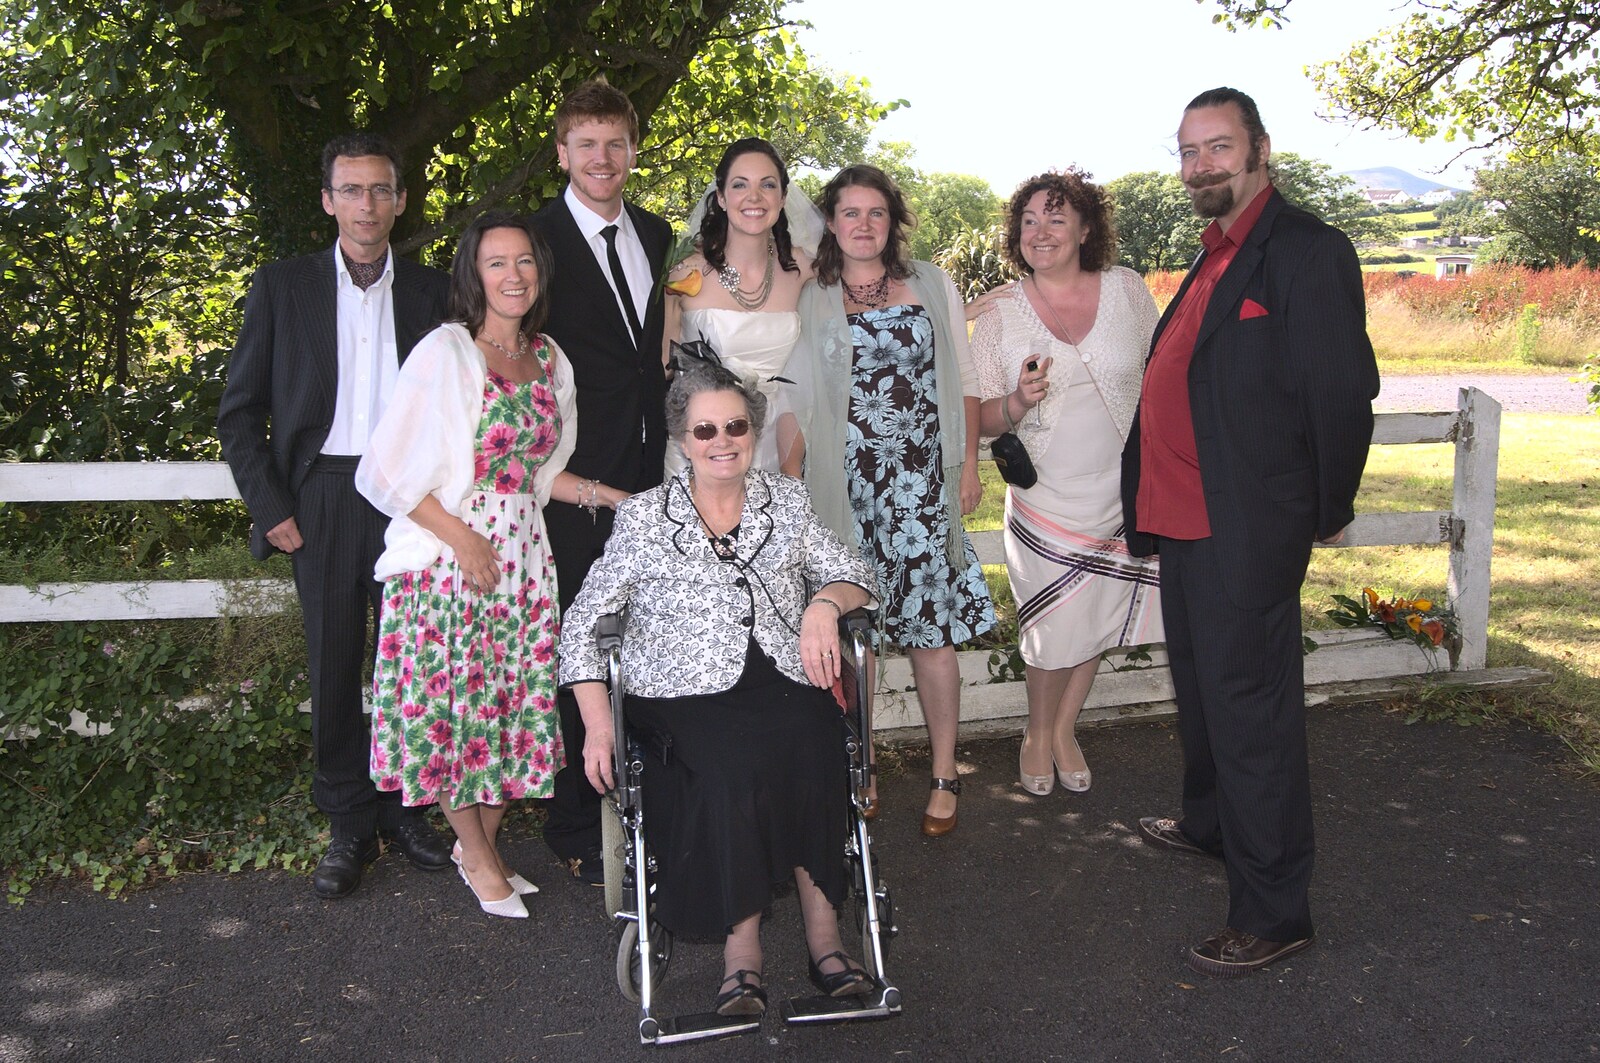 An Isobel family photo from Julie and Cameron's Wedding, Ballintaggart House, Dingle - 24th July 2009